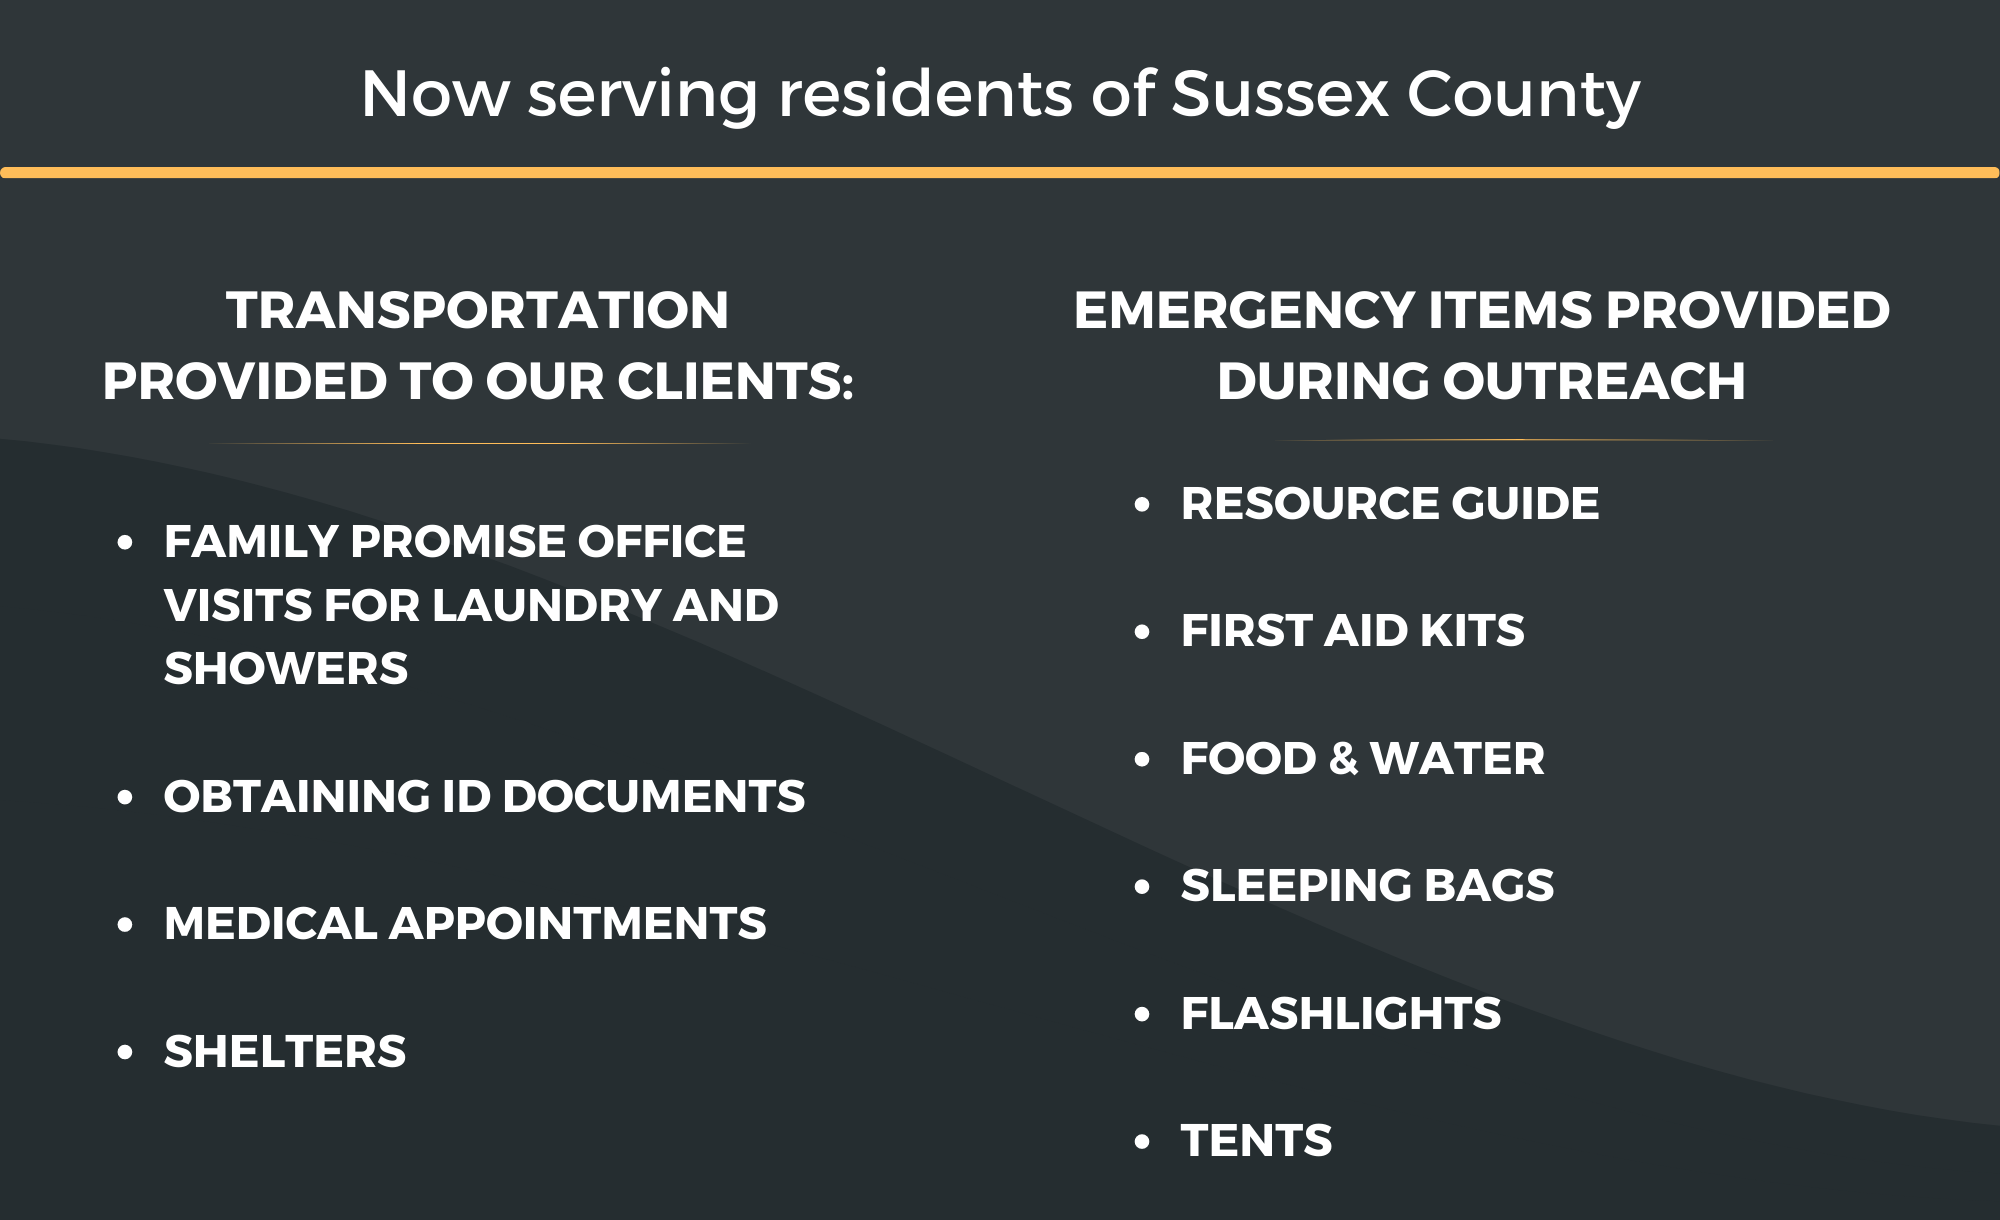 Now serving residents of Sussex County (1)